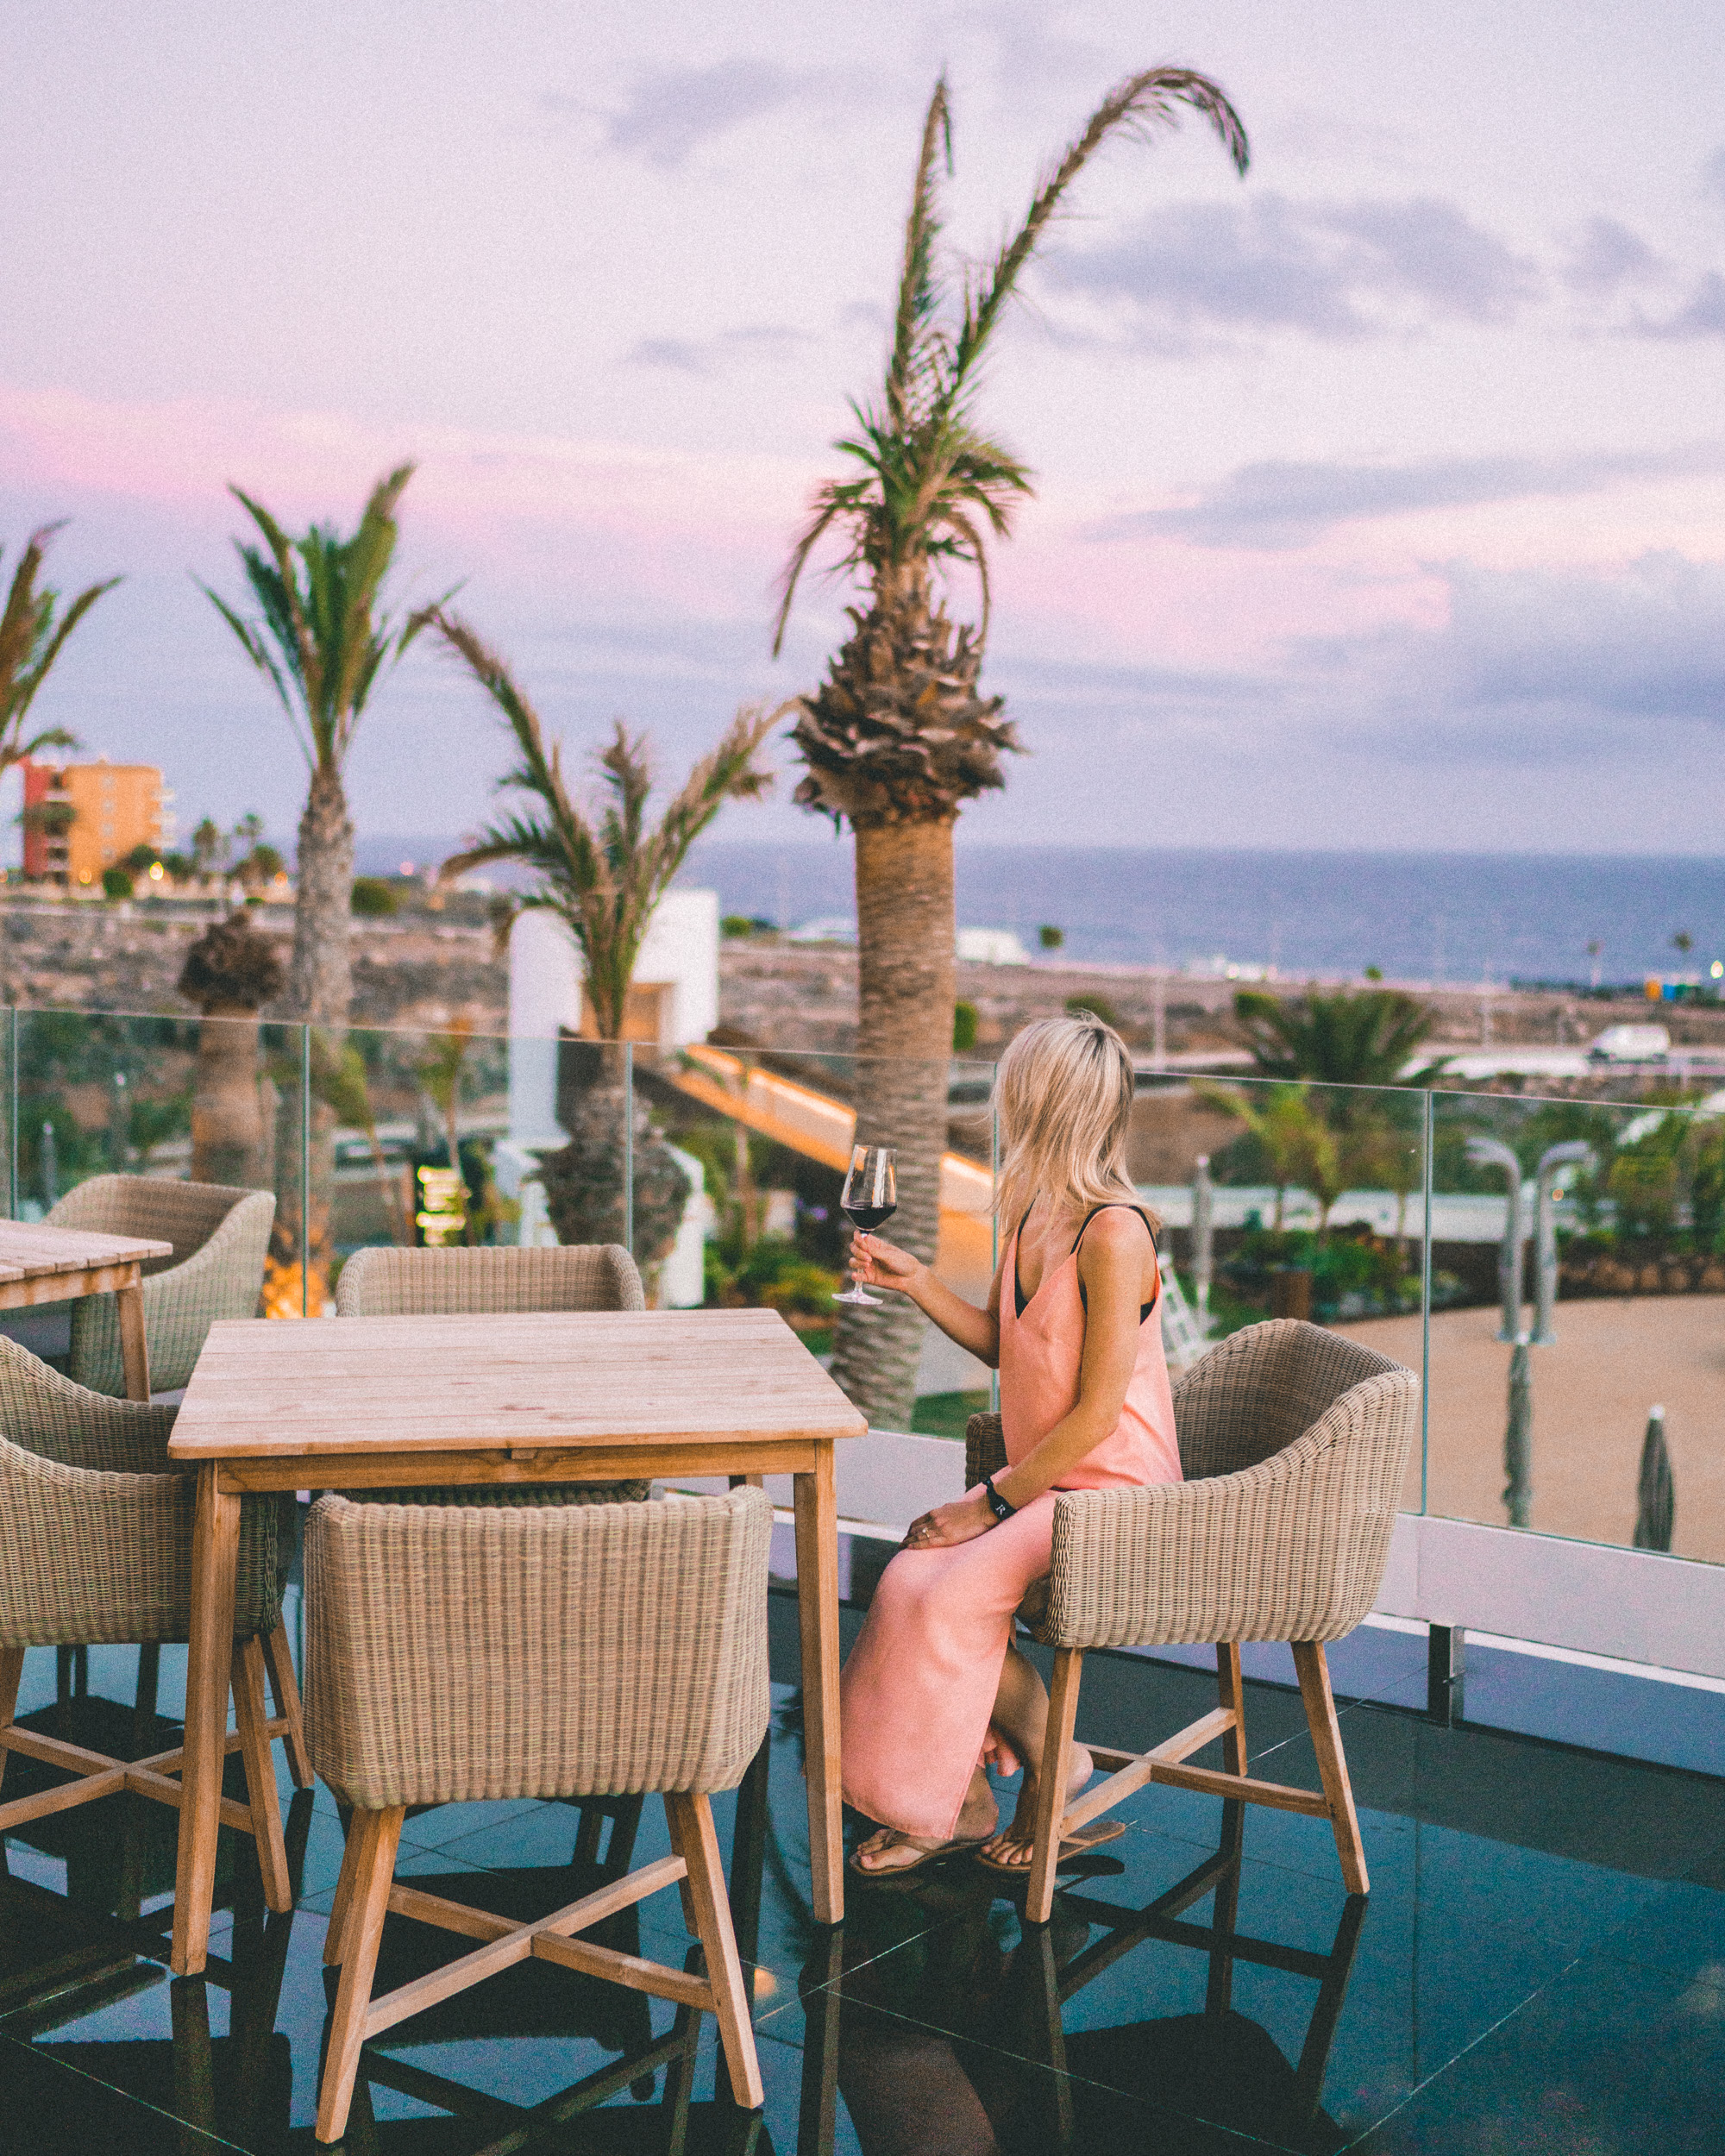 Spanish tapas and red wine in Tenerife, Canary Islands, Spain